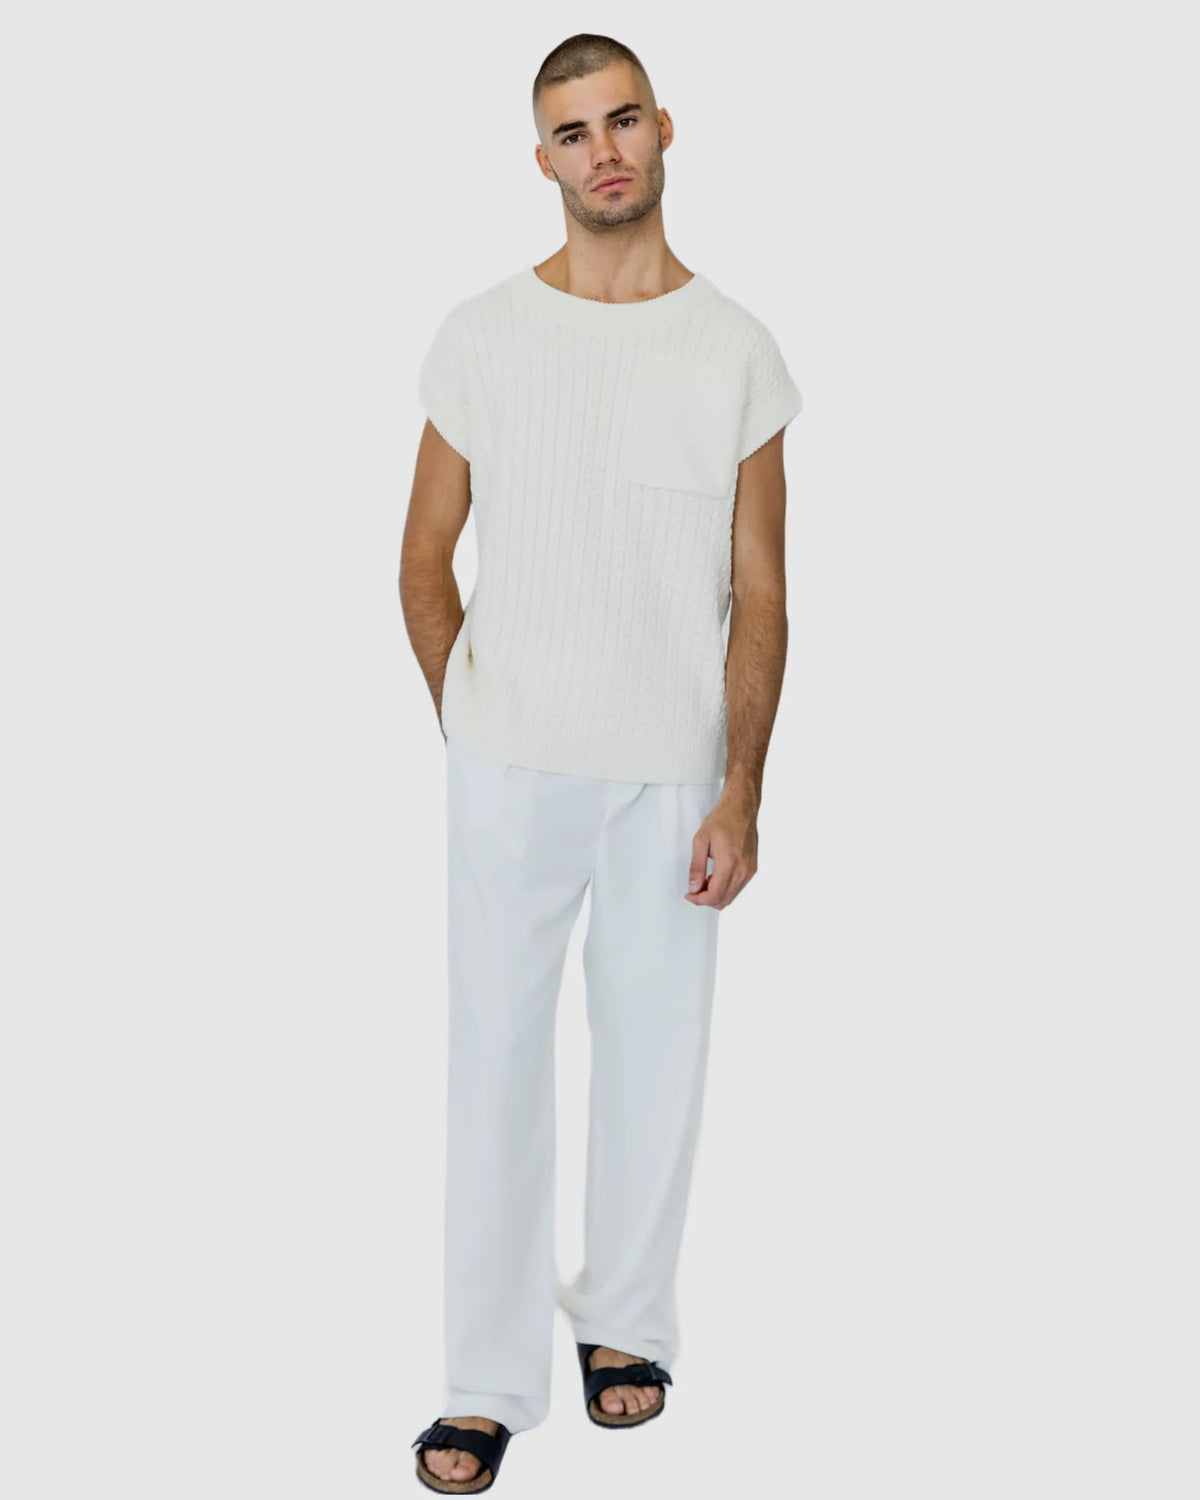 Justin Cassin Mateo Pocket Knitted Vest in White Color 2